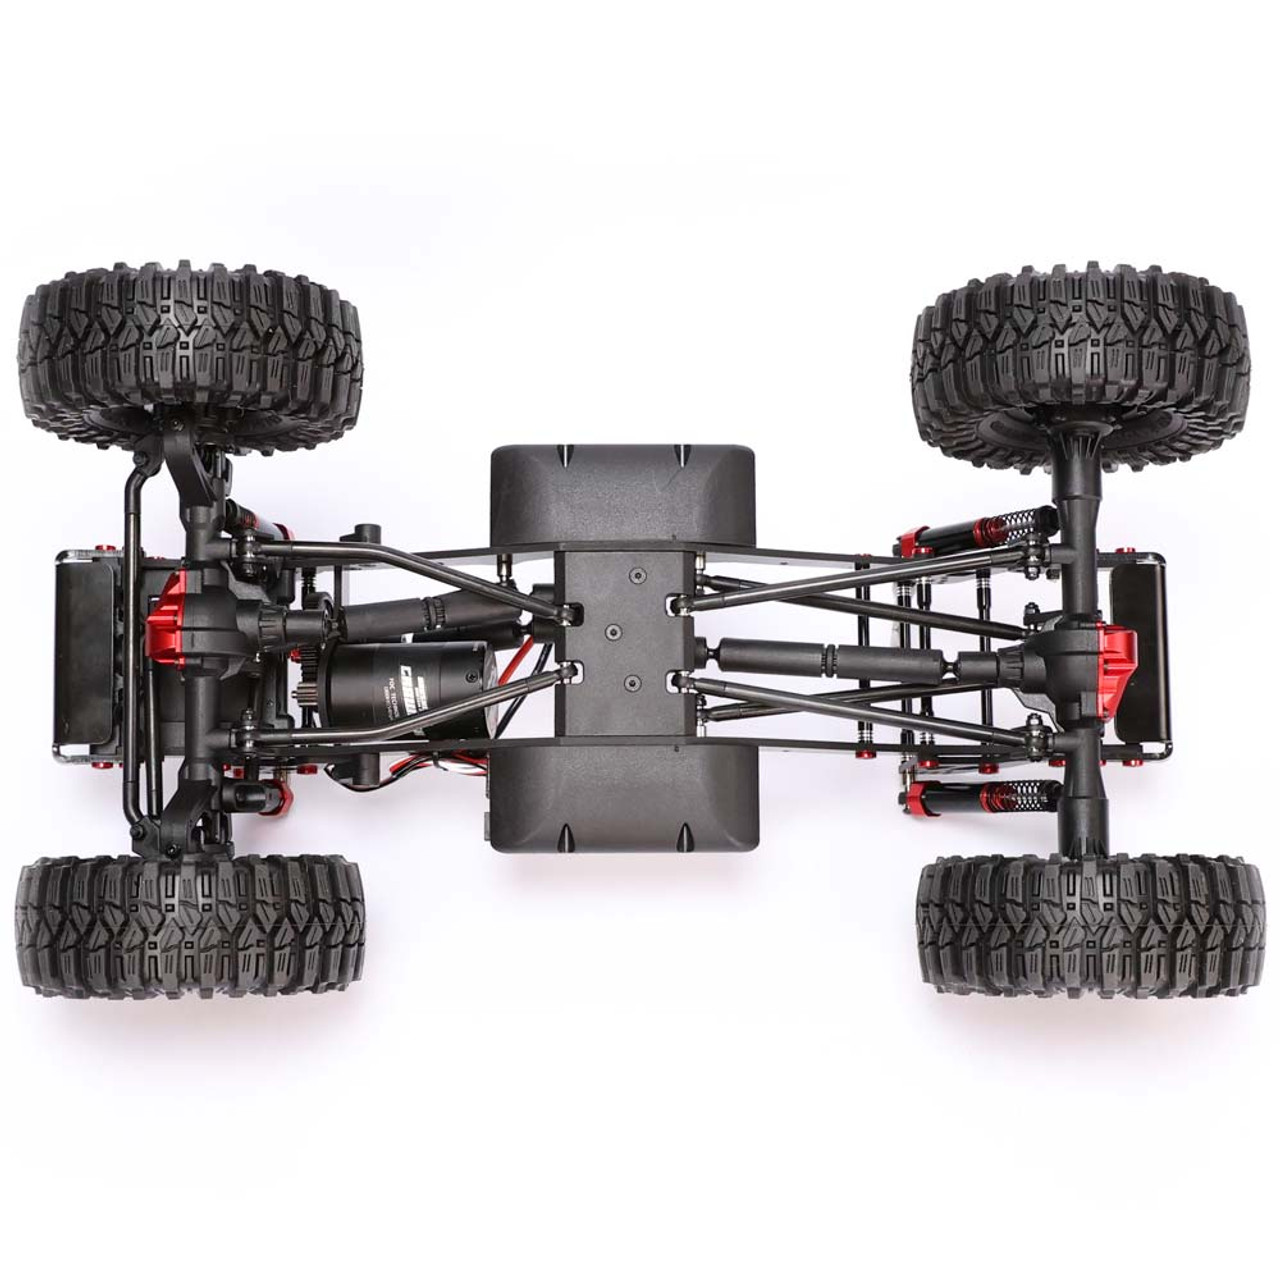 Redcat Ascent Fusion 1/10 Scale Brushless 4x4 RTR Rock Crawler  w/2.4GHz Radio